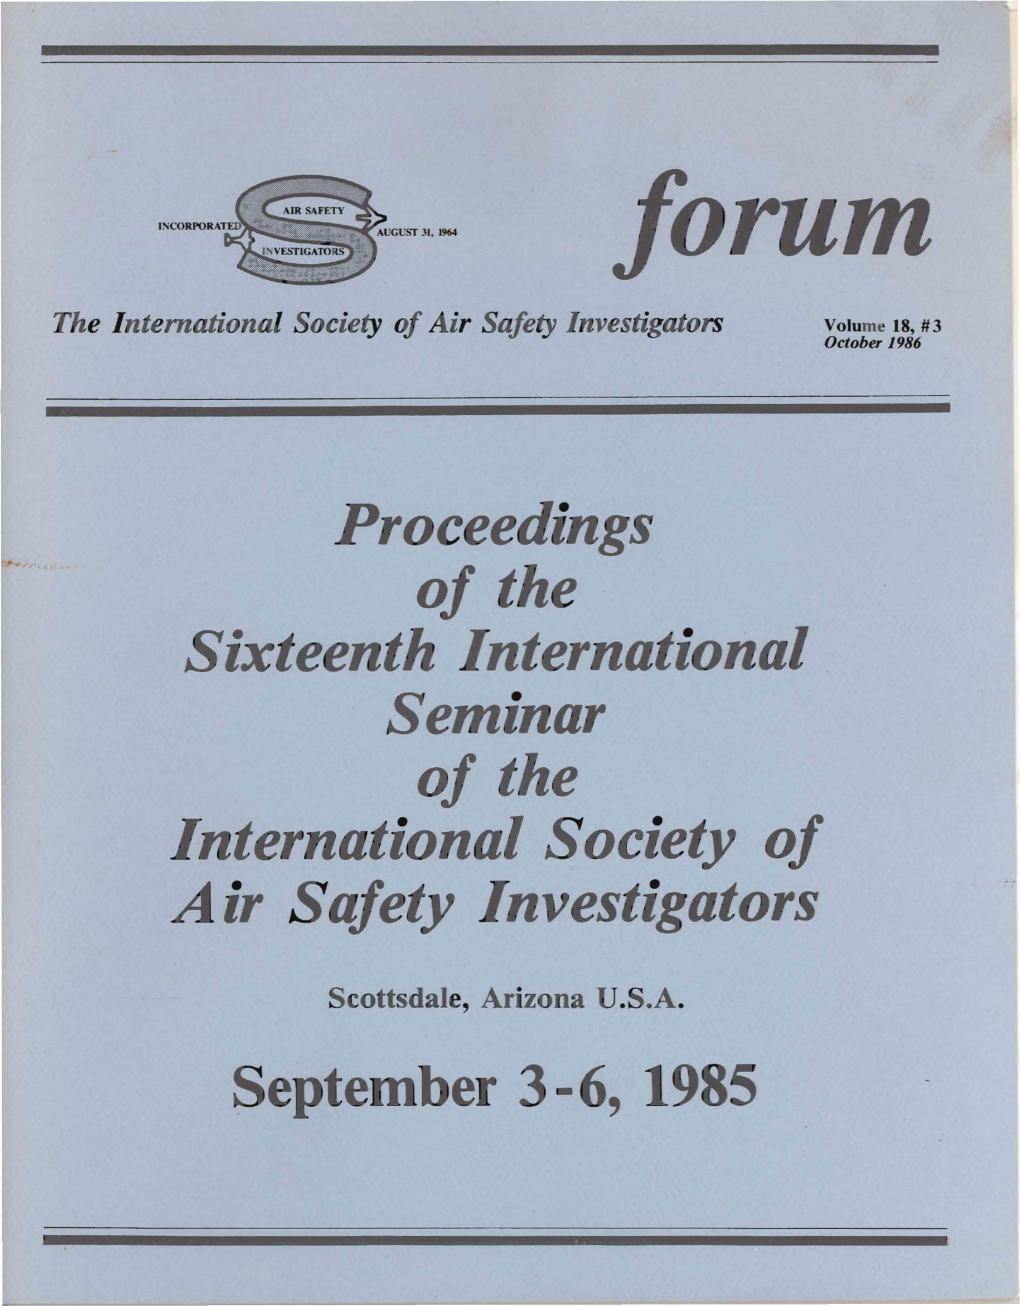 Proceedings of the of the International Ociety of Air Afety Investigators